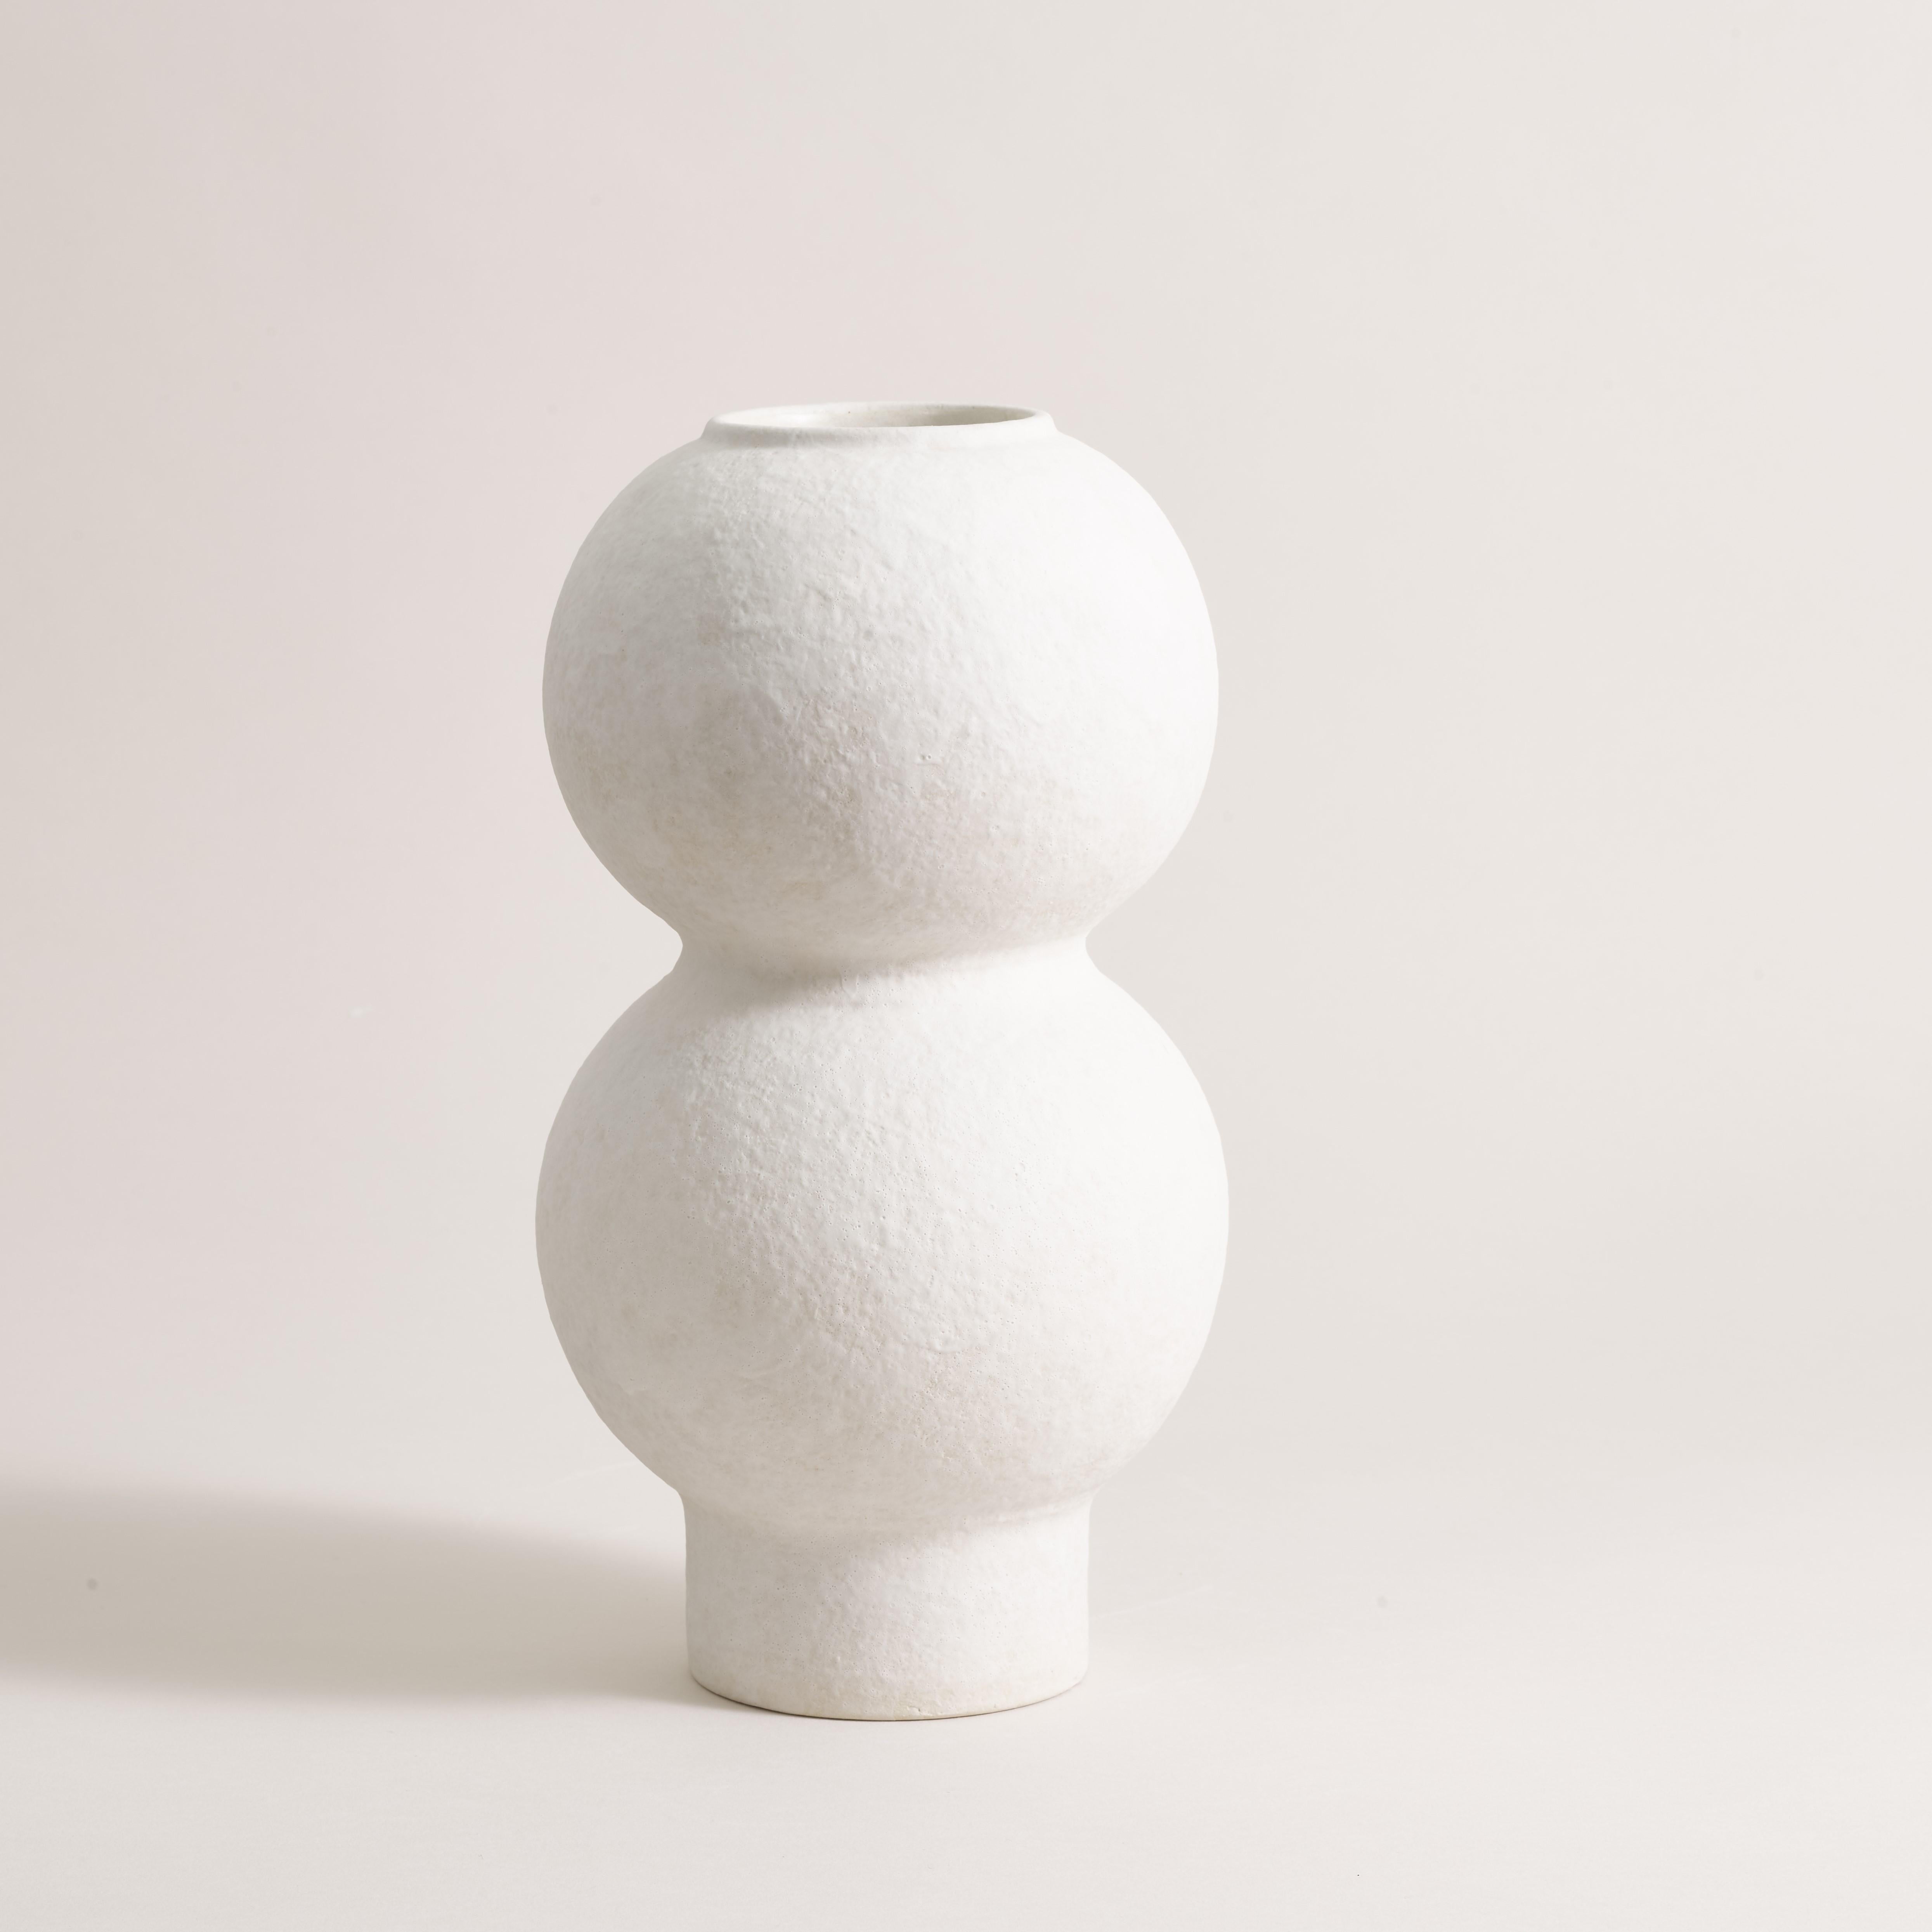 Handcrafted Vase 075 by Lovebuch.
Dimensions: Ø 15 x H 28 cm.
Materials: Sandstone, porcelain, handcrafted piece.

Katia works with wood and clay, these raw, powerfully expressive materials are shaped to create a poetry of objects that inhabit